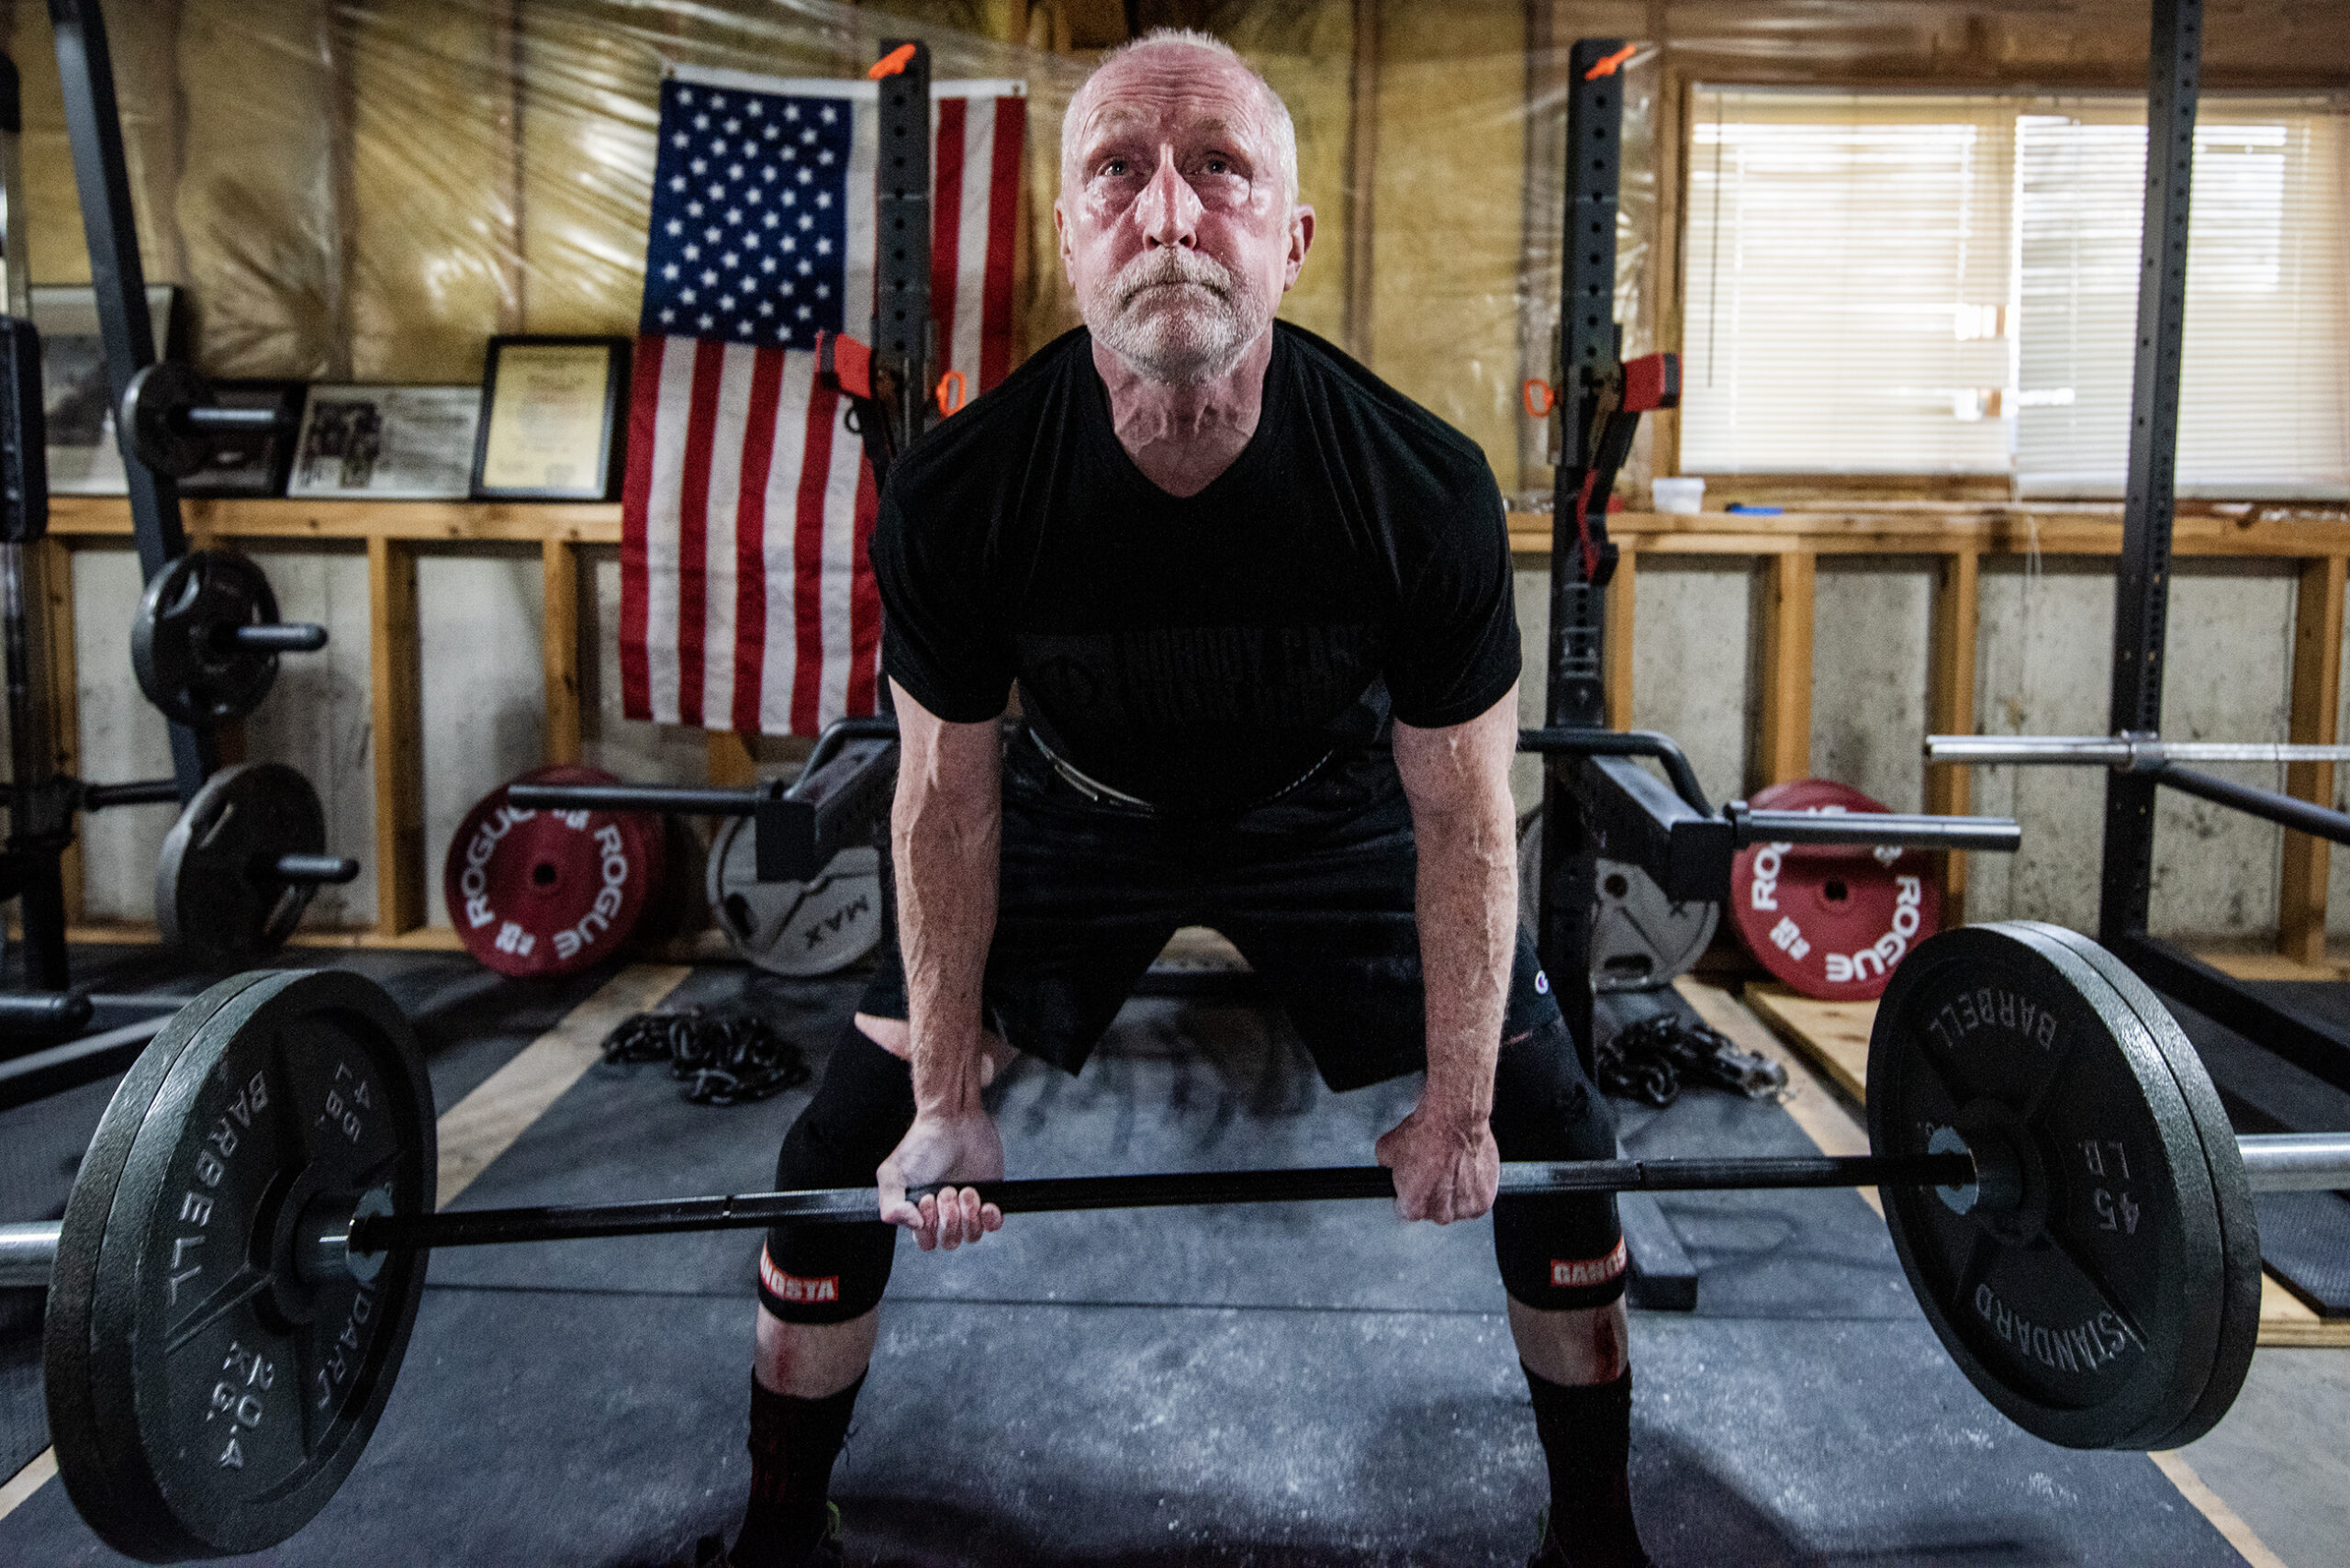 Michael Love's face is red as he pulls up on a bar with two large weights on either side. He's in his basement with tan walls and a U.S. flag behind him.